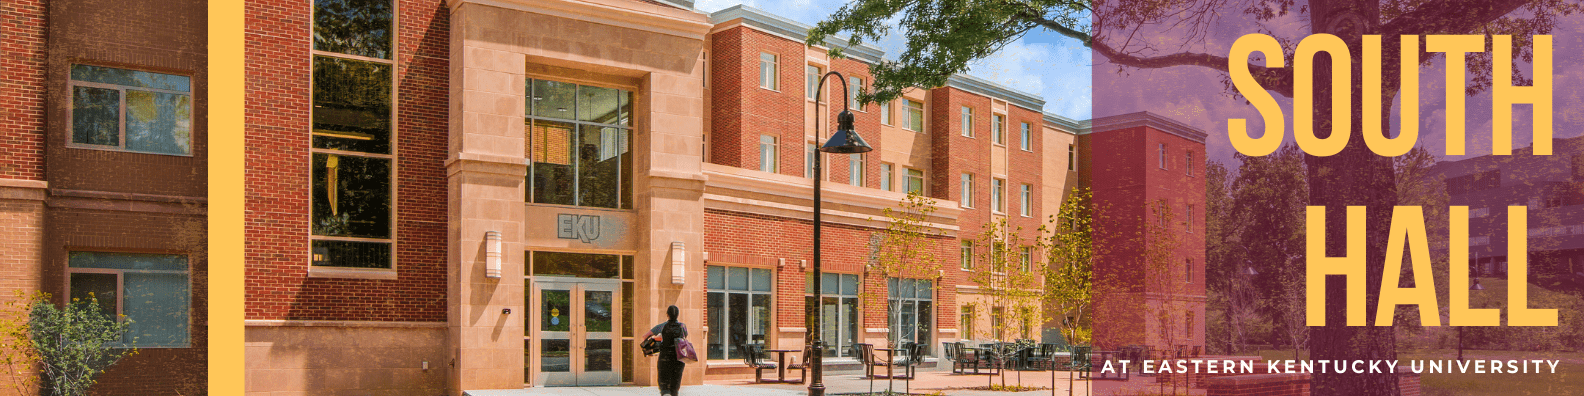 An image of South Hall at EKU, with the text "South Hall".